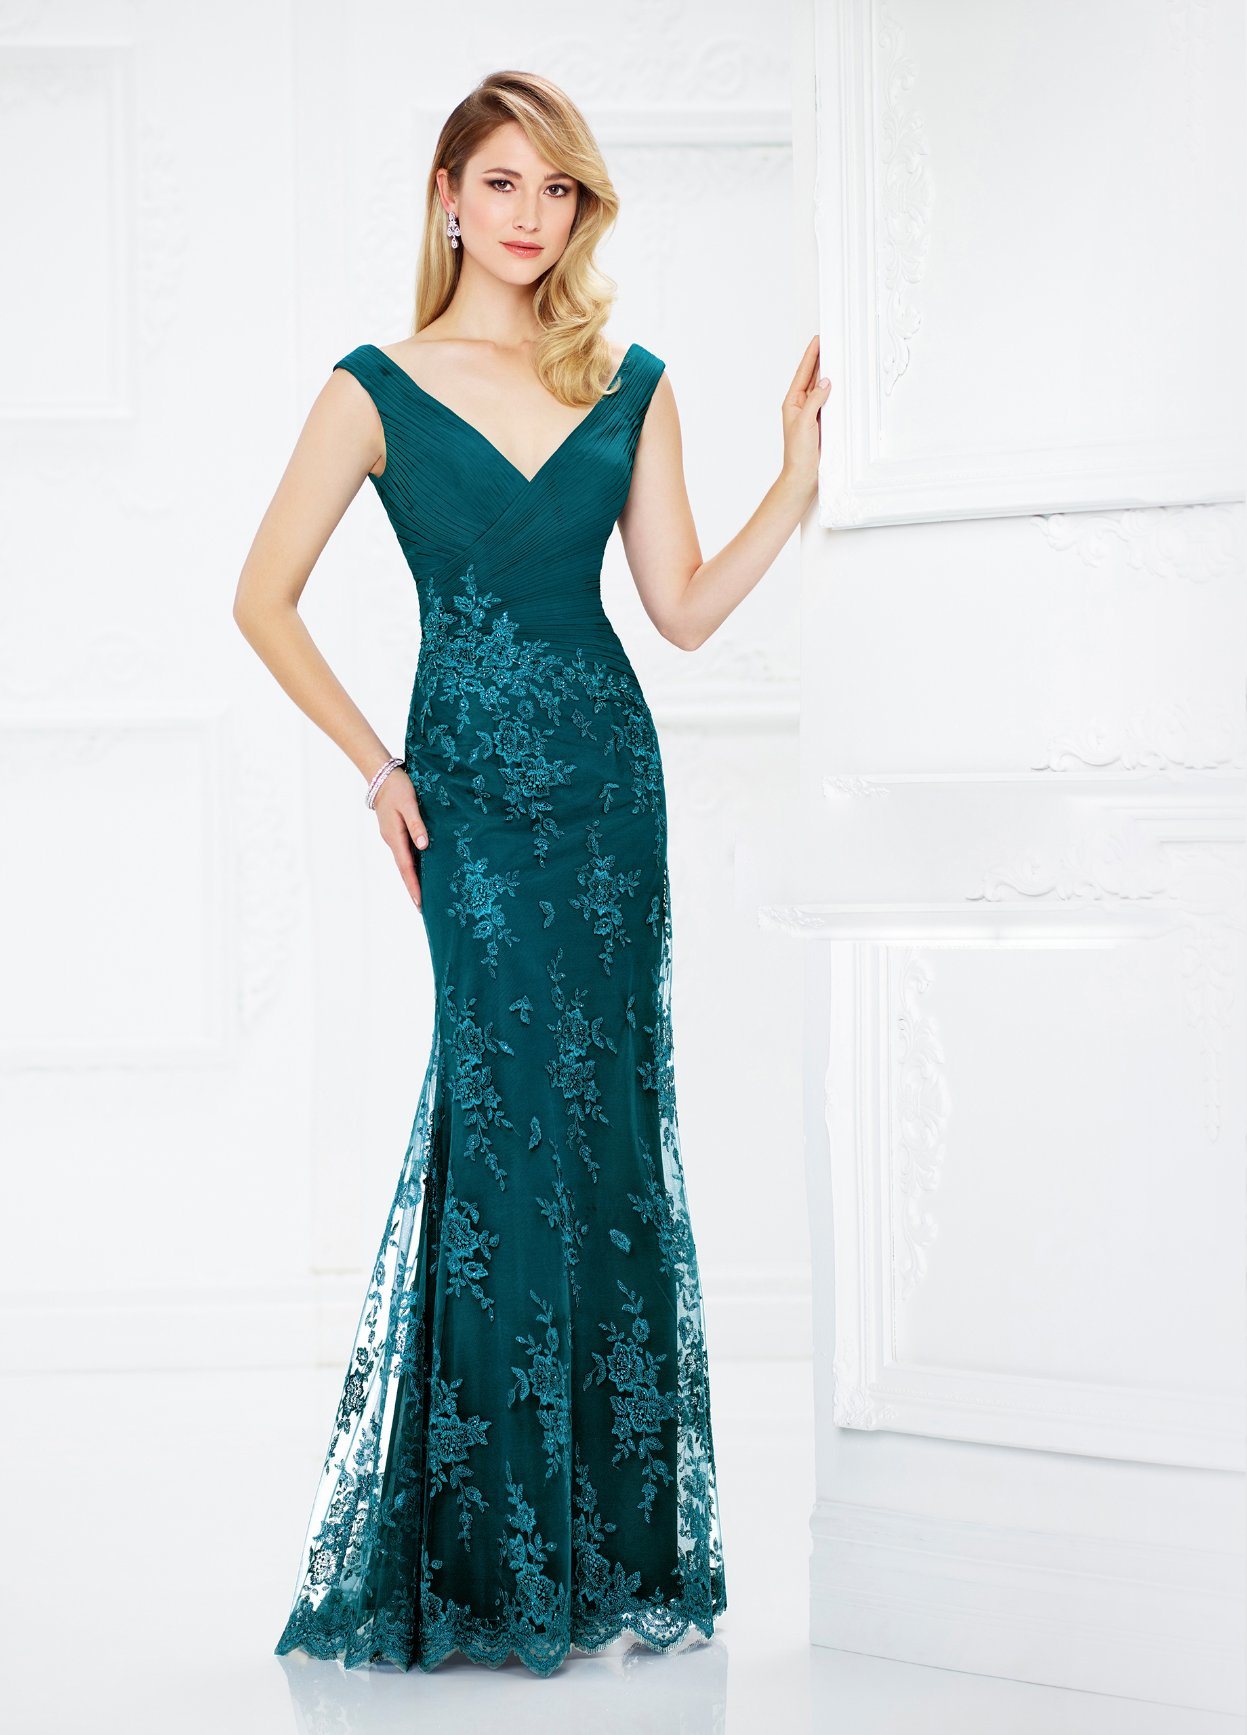 Amelie Rocky Teal Lace Evening Dress Formal Party Gown